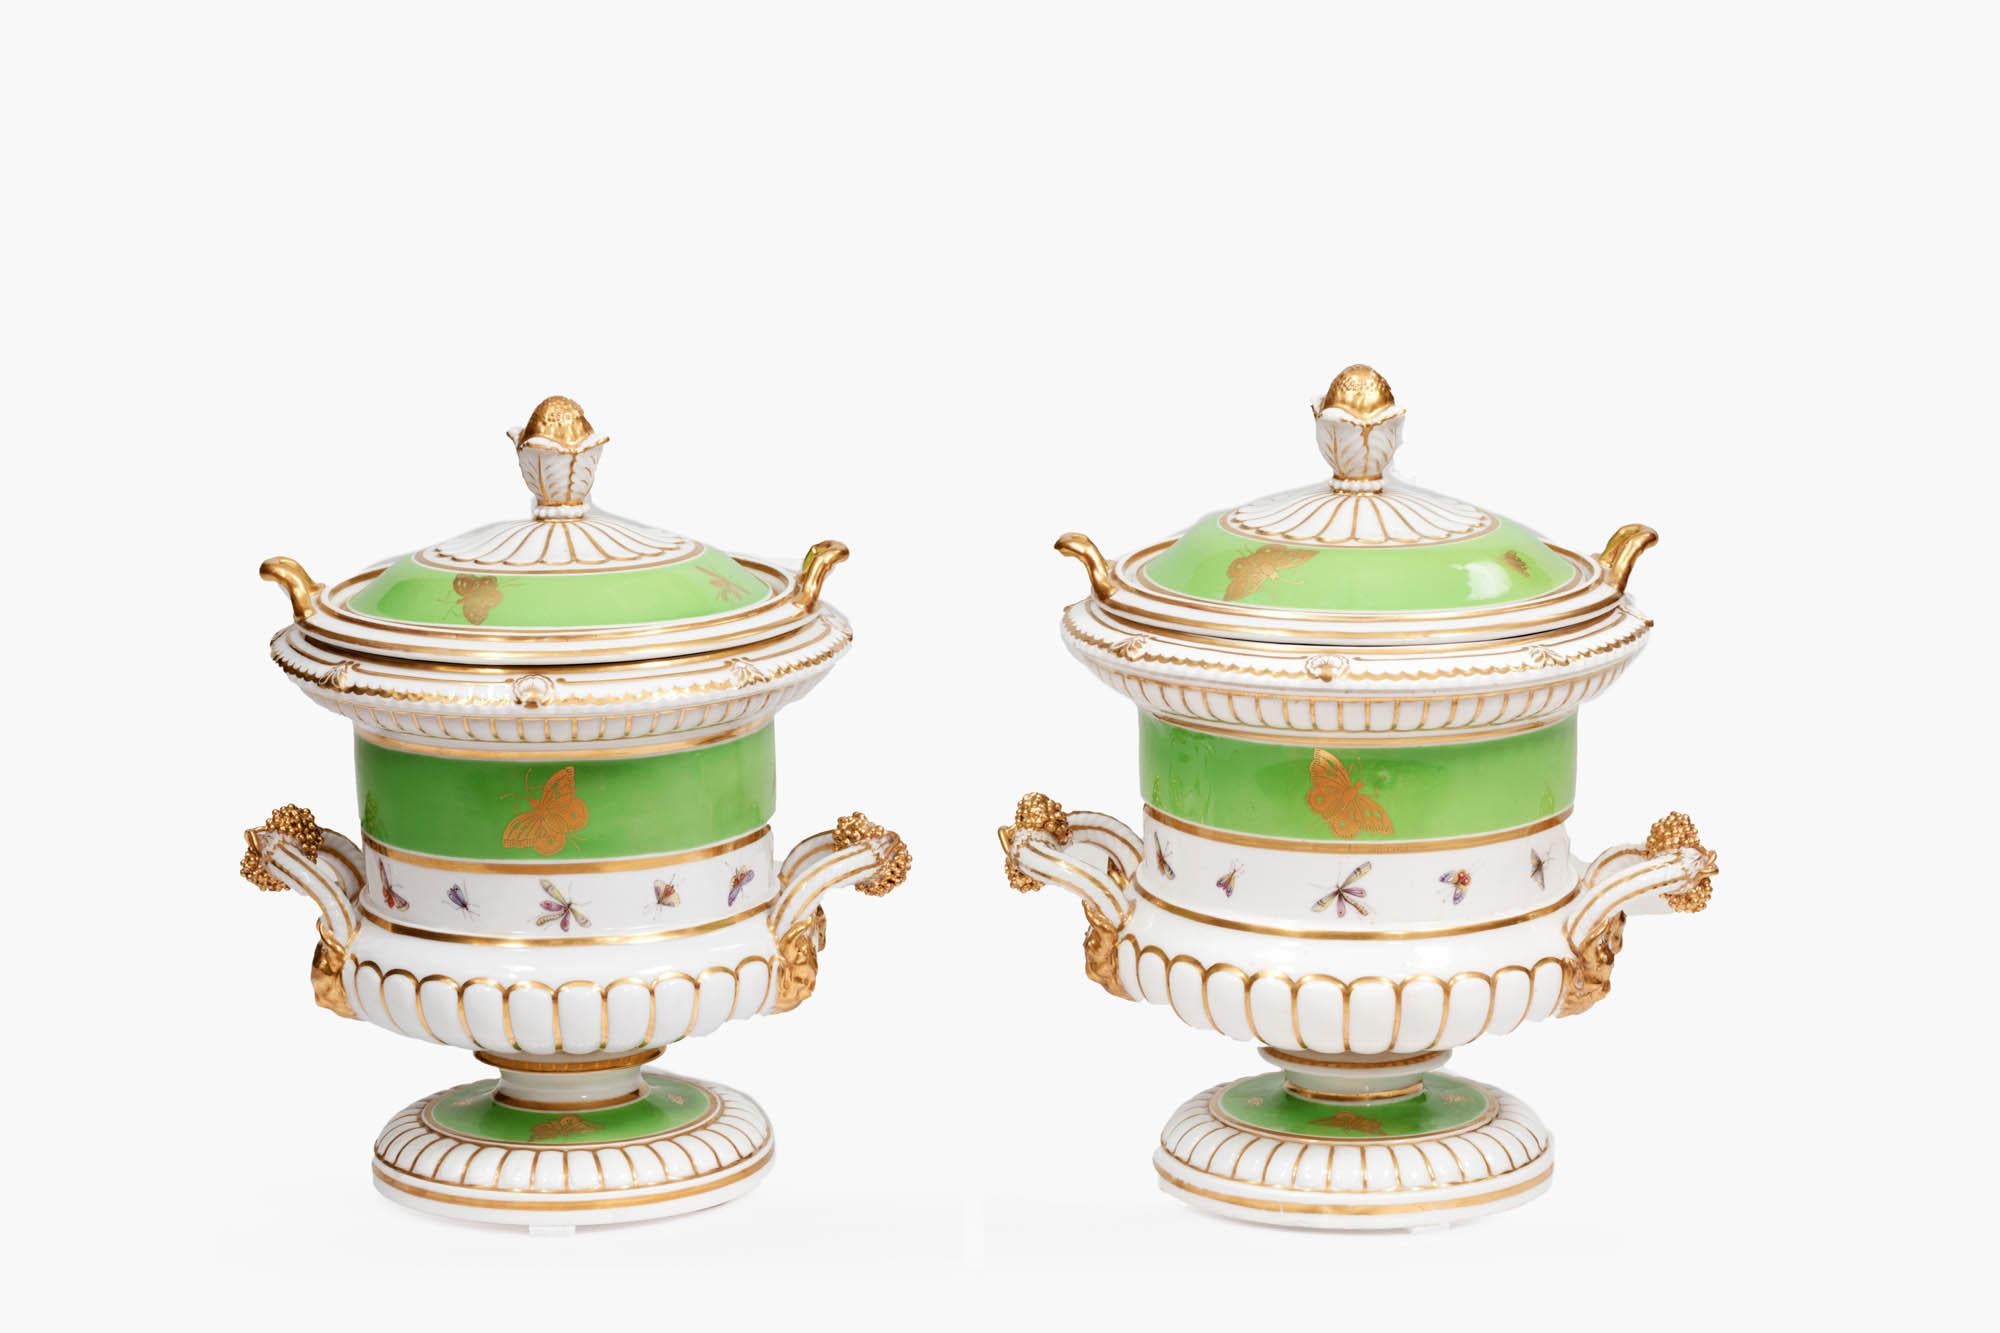 Regency Pair of 19th Century Green & White Ice Pails by Chamberlain of Worcester